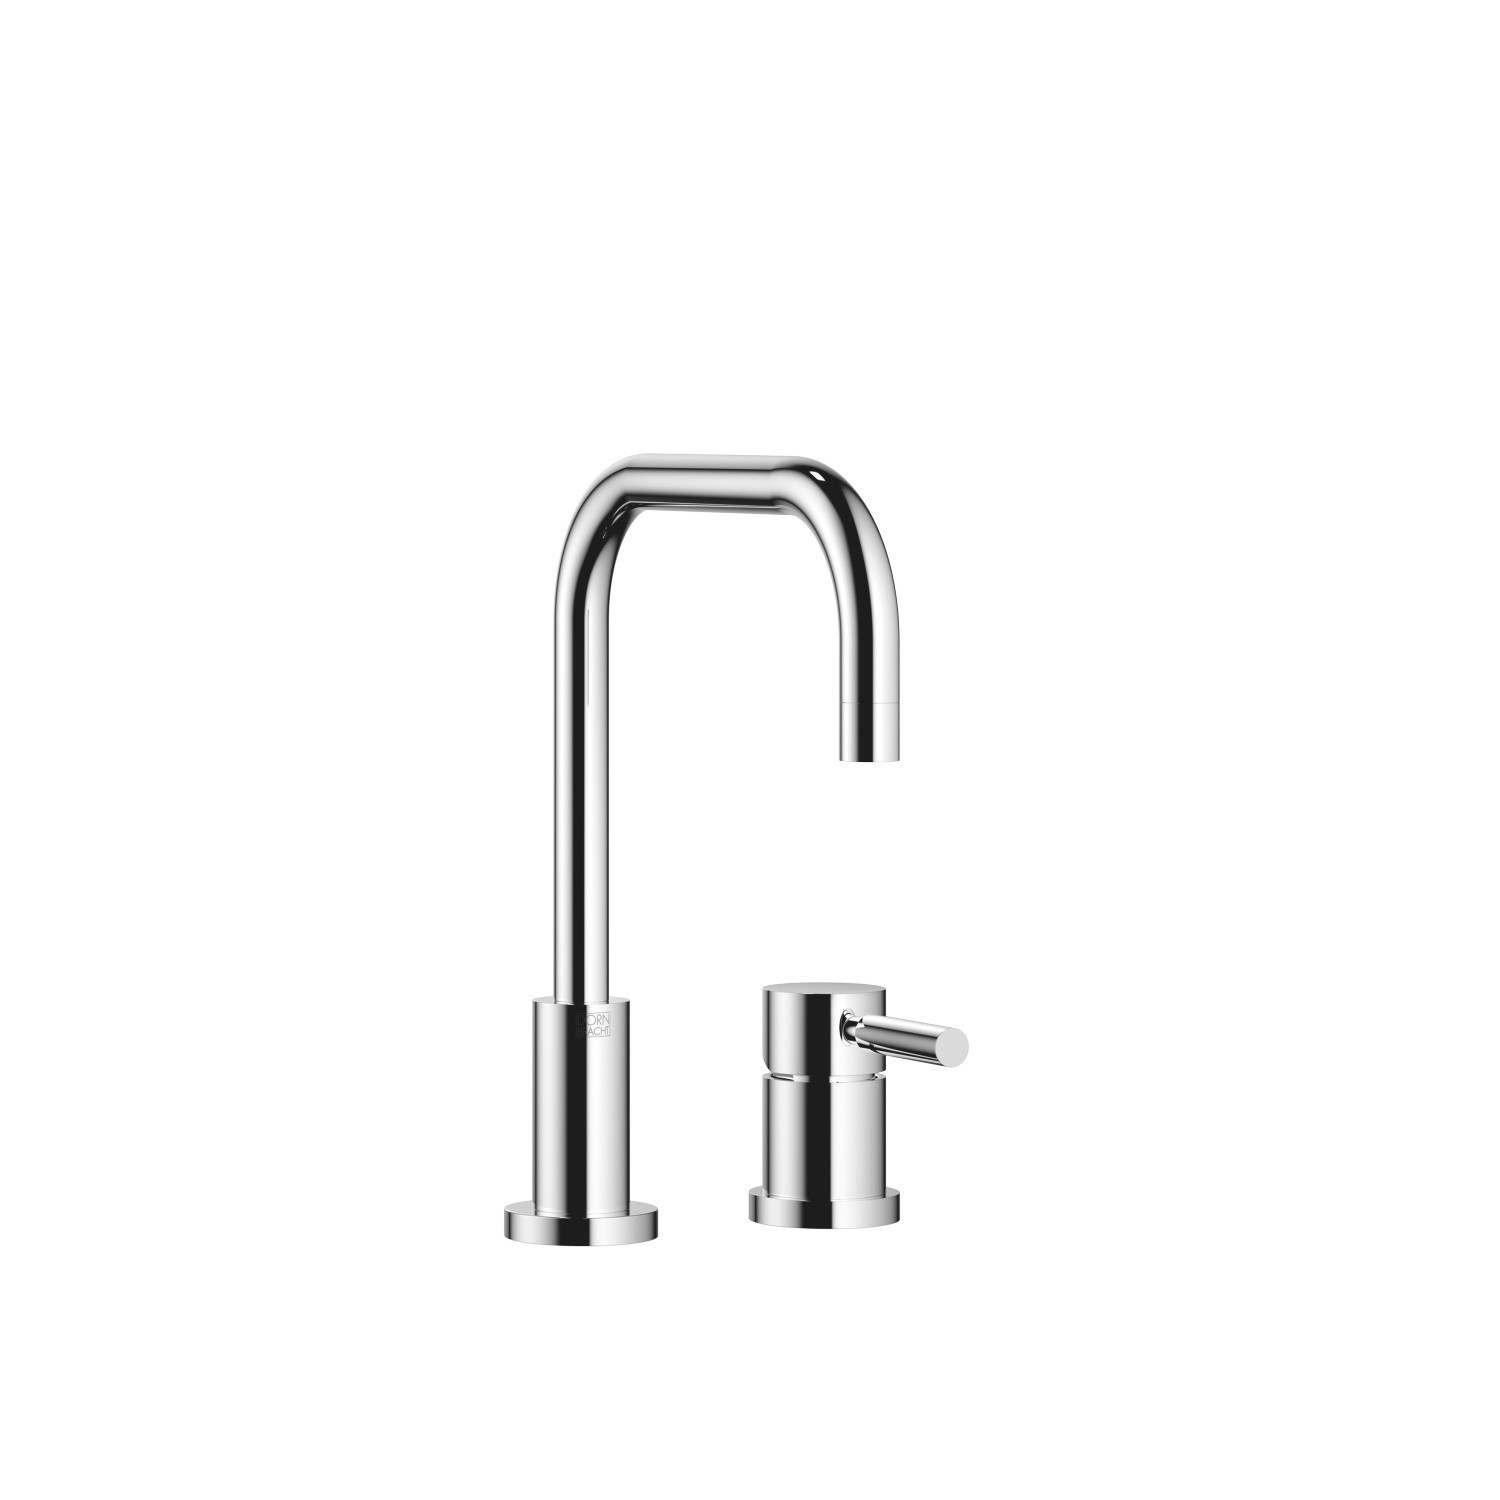 DORNBRACHT 32800625-0010 META.02 TWO HOLES DECK MOUNT KITCHEN FAUCET WITH INDIVIDUAL FLANGES AND LEVER HANDLES